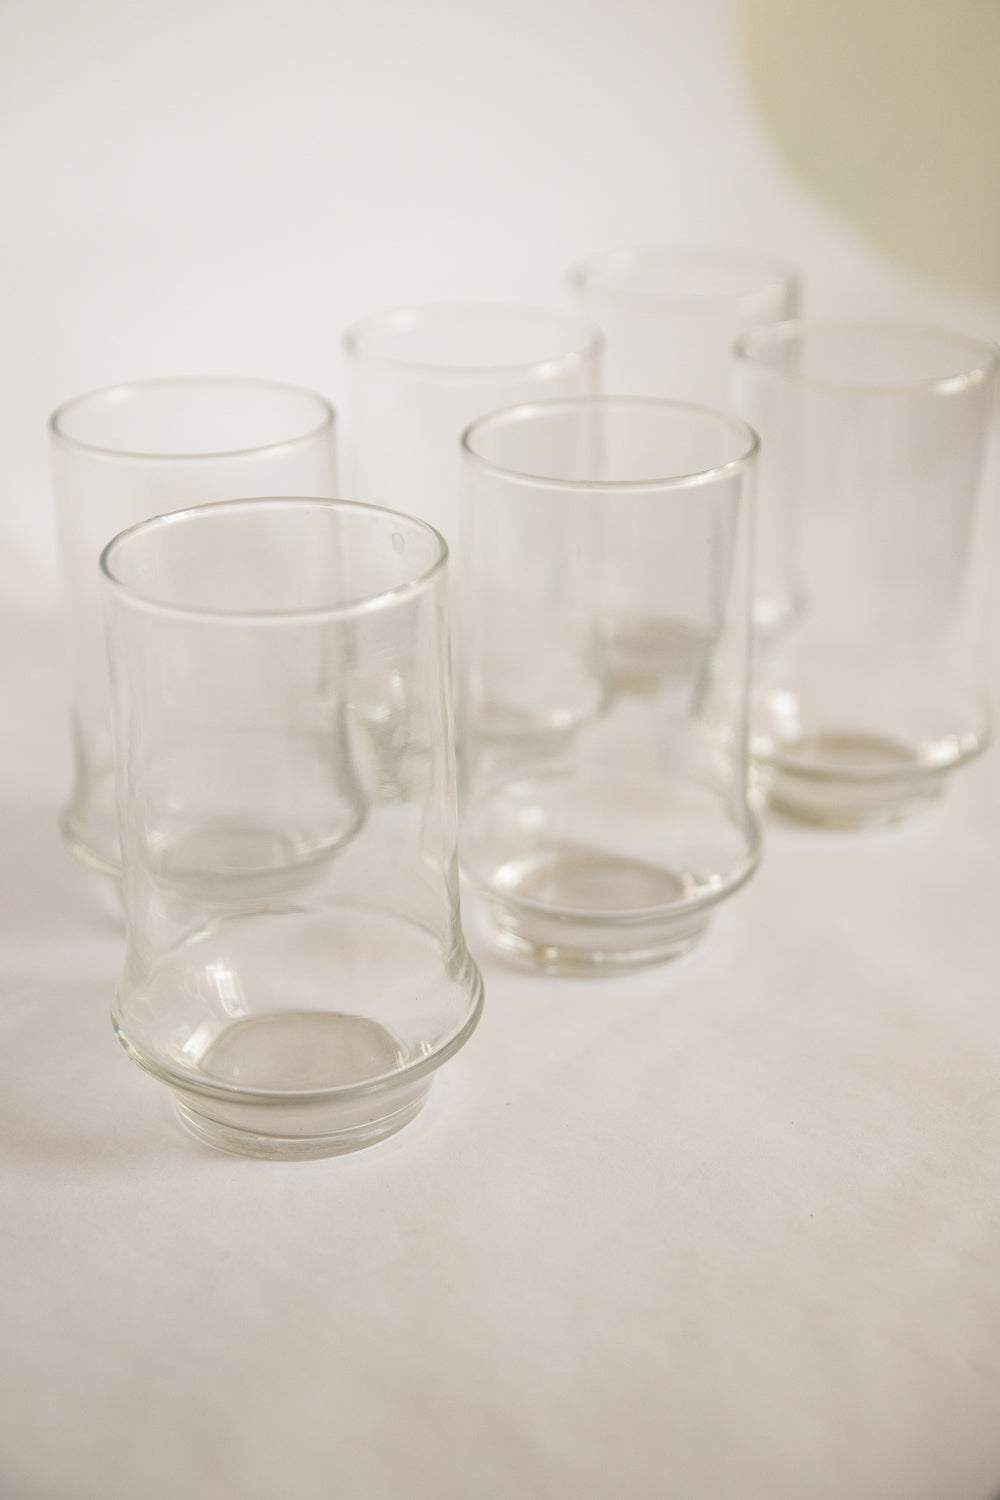 Set of 6 Libbey Drinking Glasses